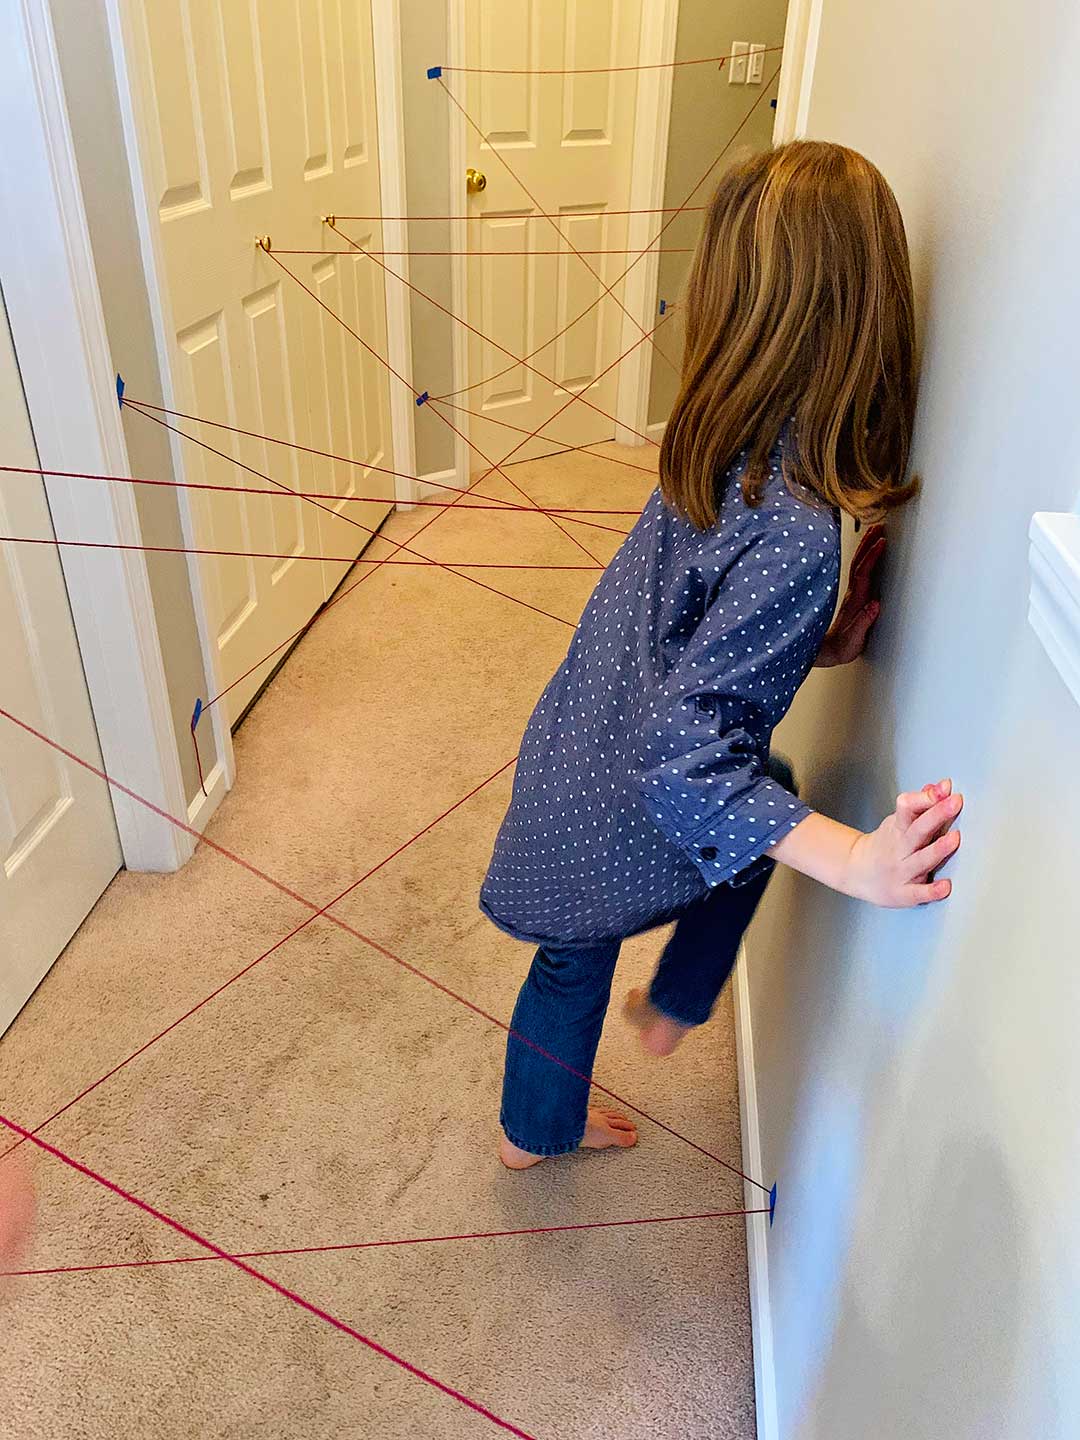 A girl in a polka dotted blue shirt and jeans going through the maze.